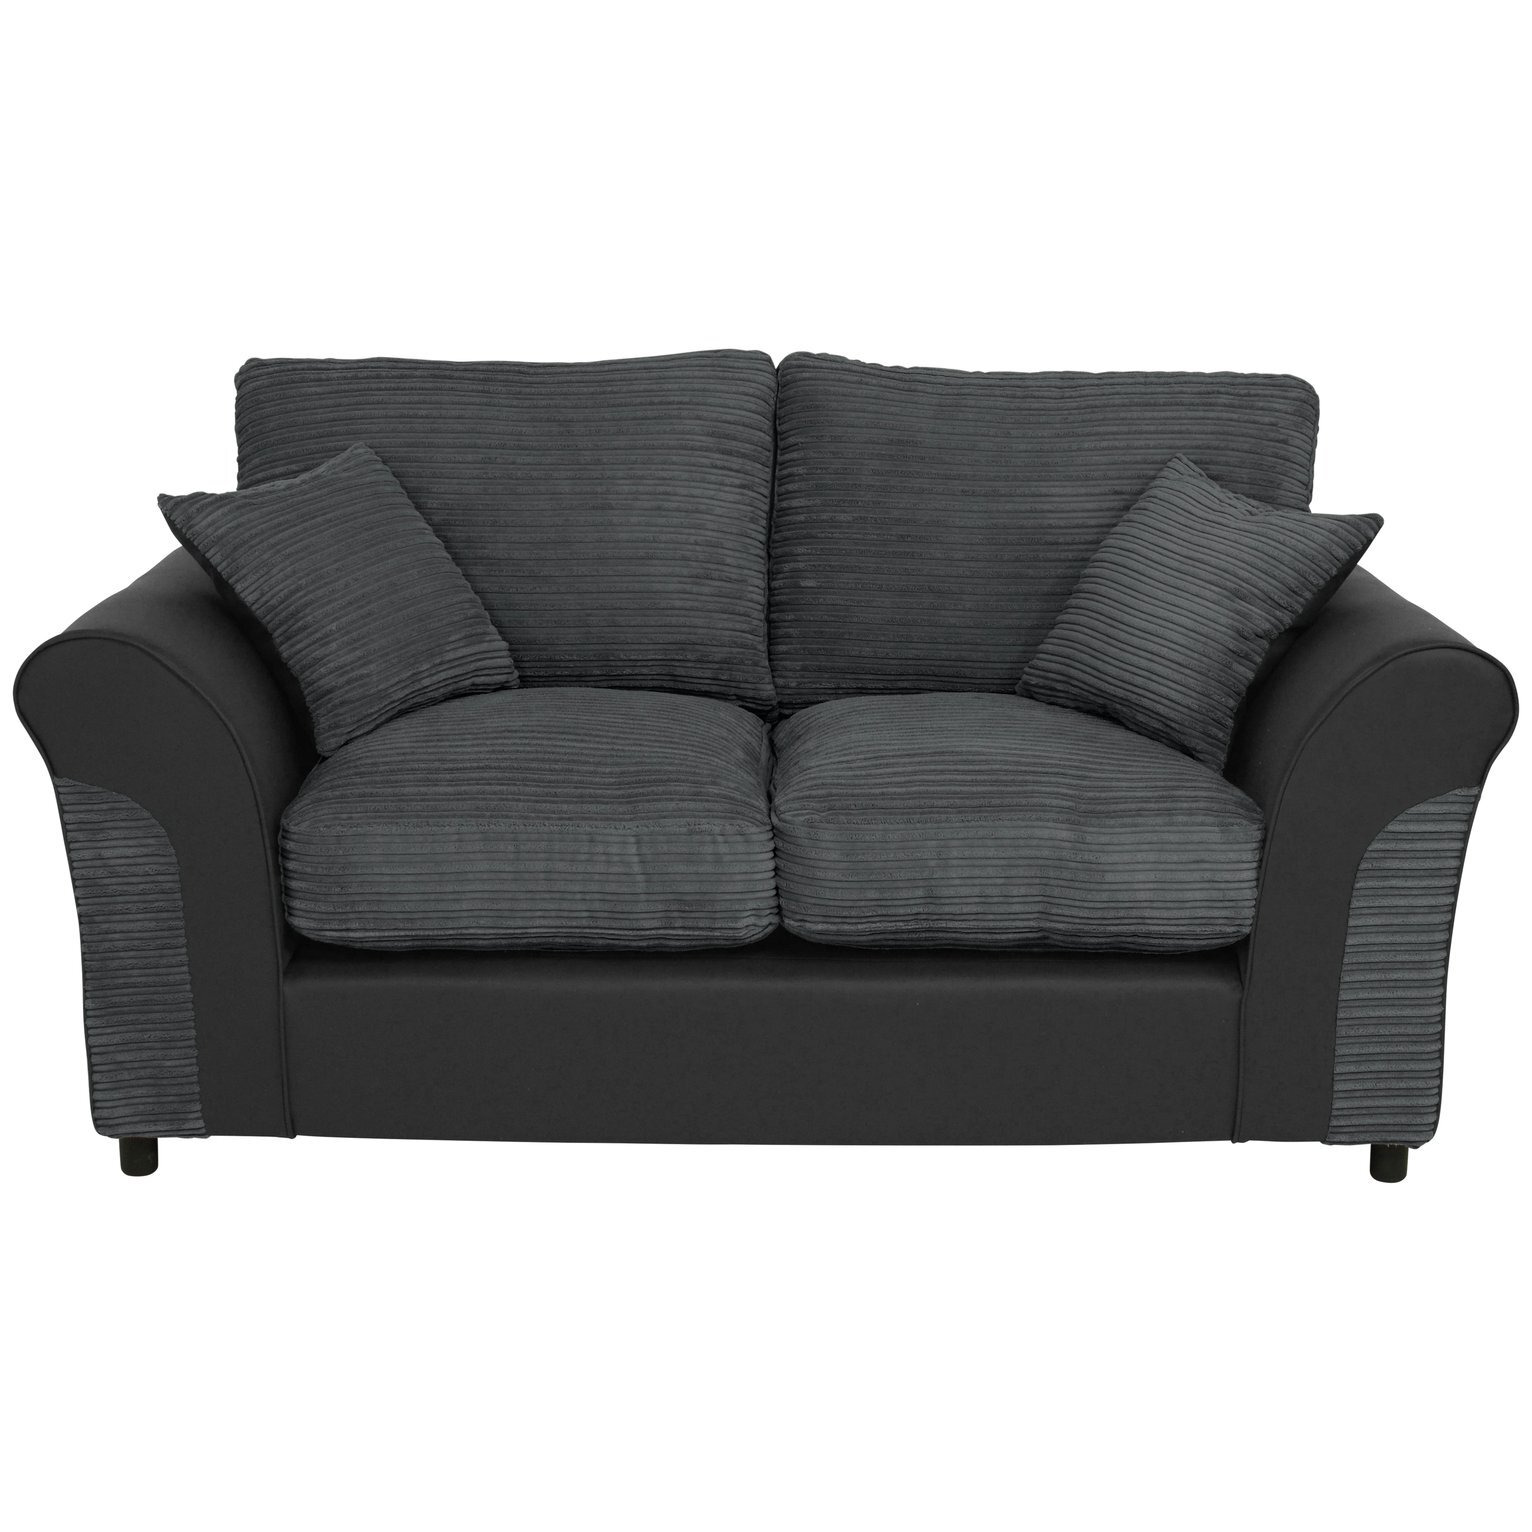 Argos Home Harry Faux Leather 2 Seater Sofa - Charcoal - image 1